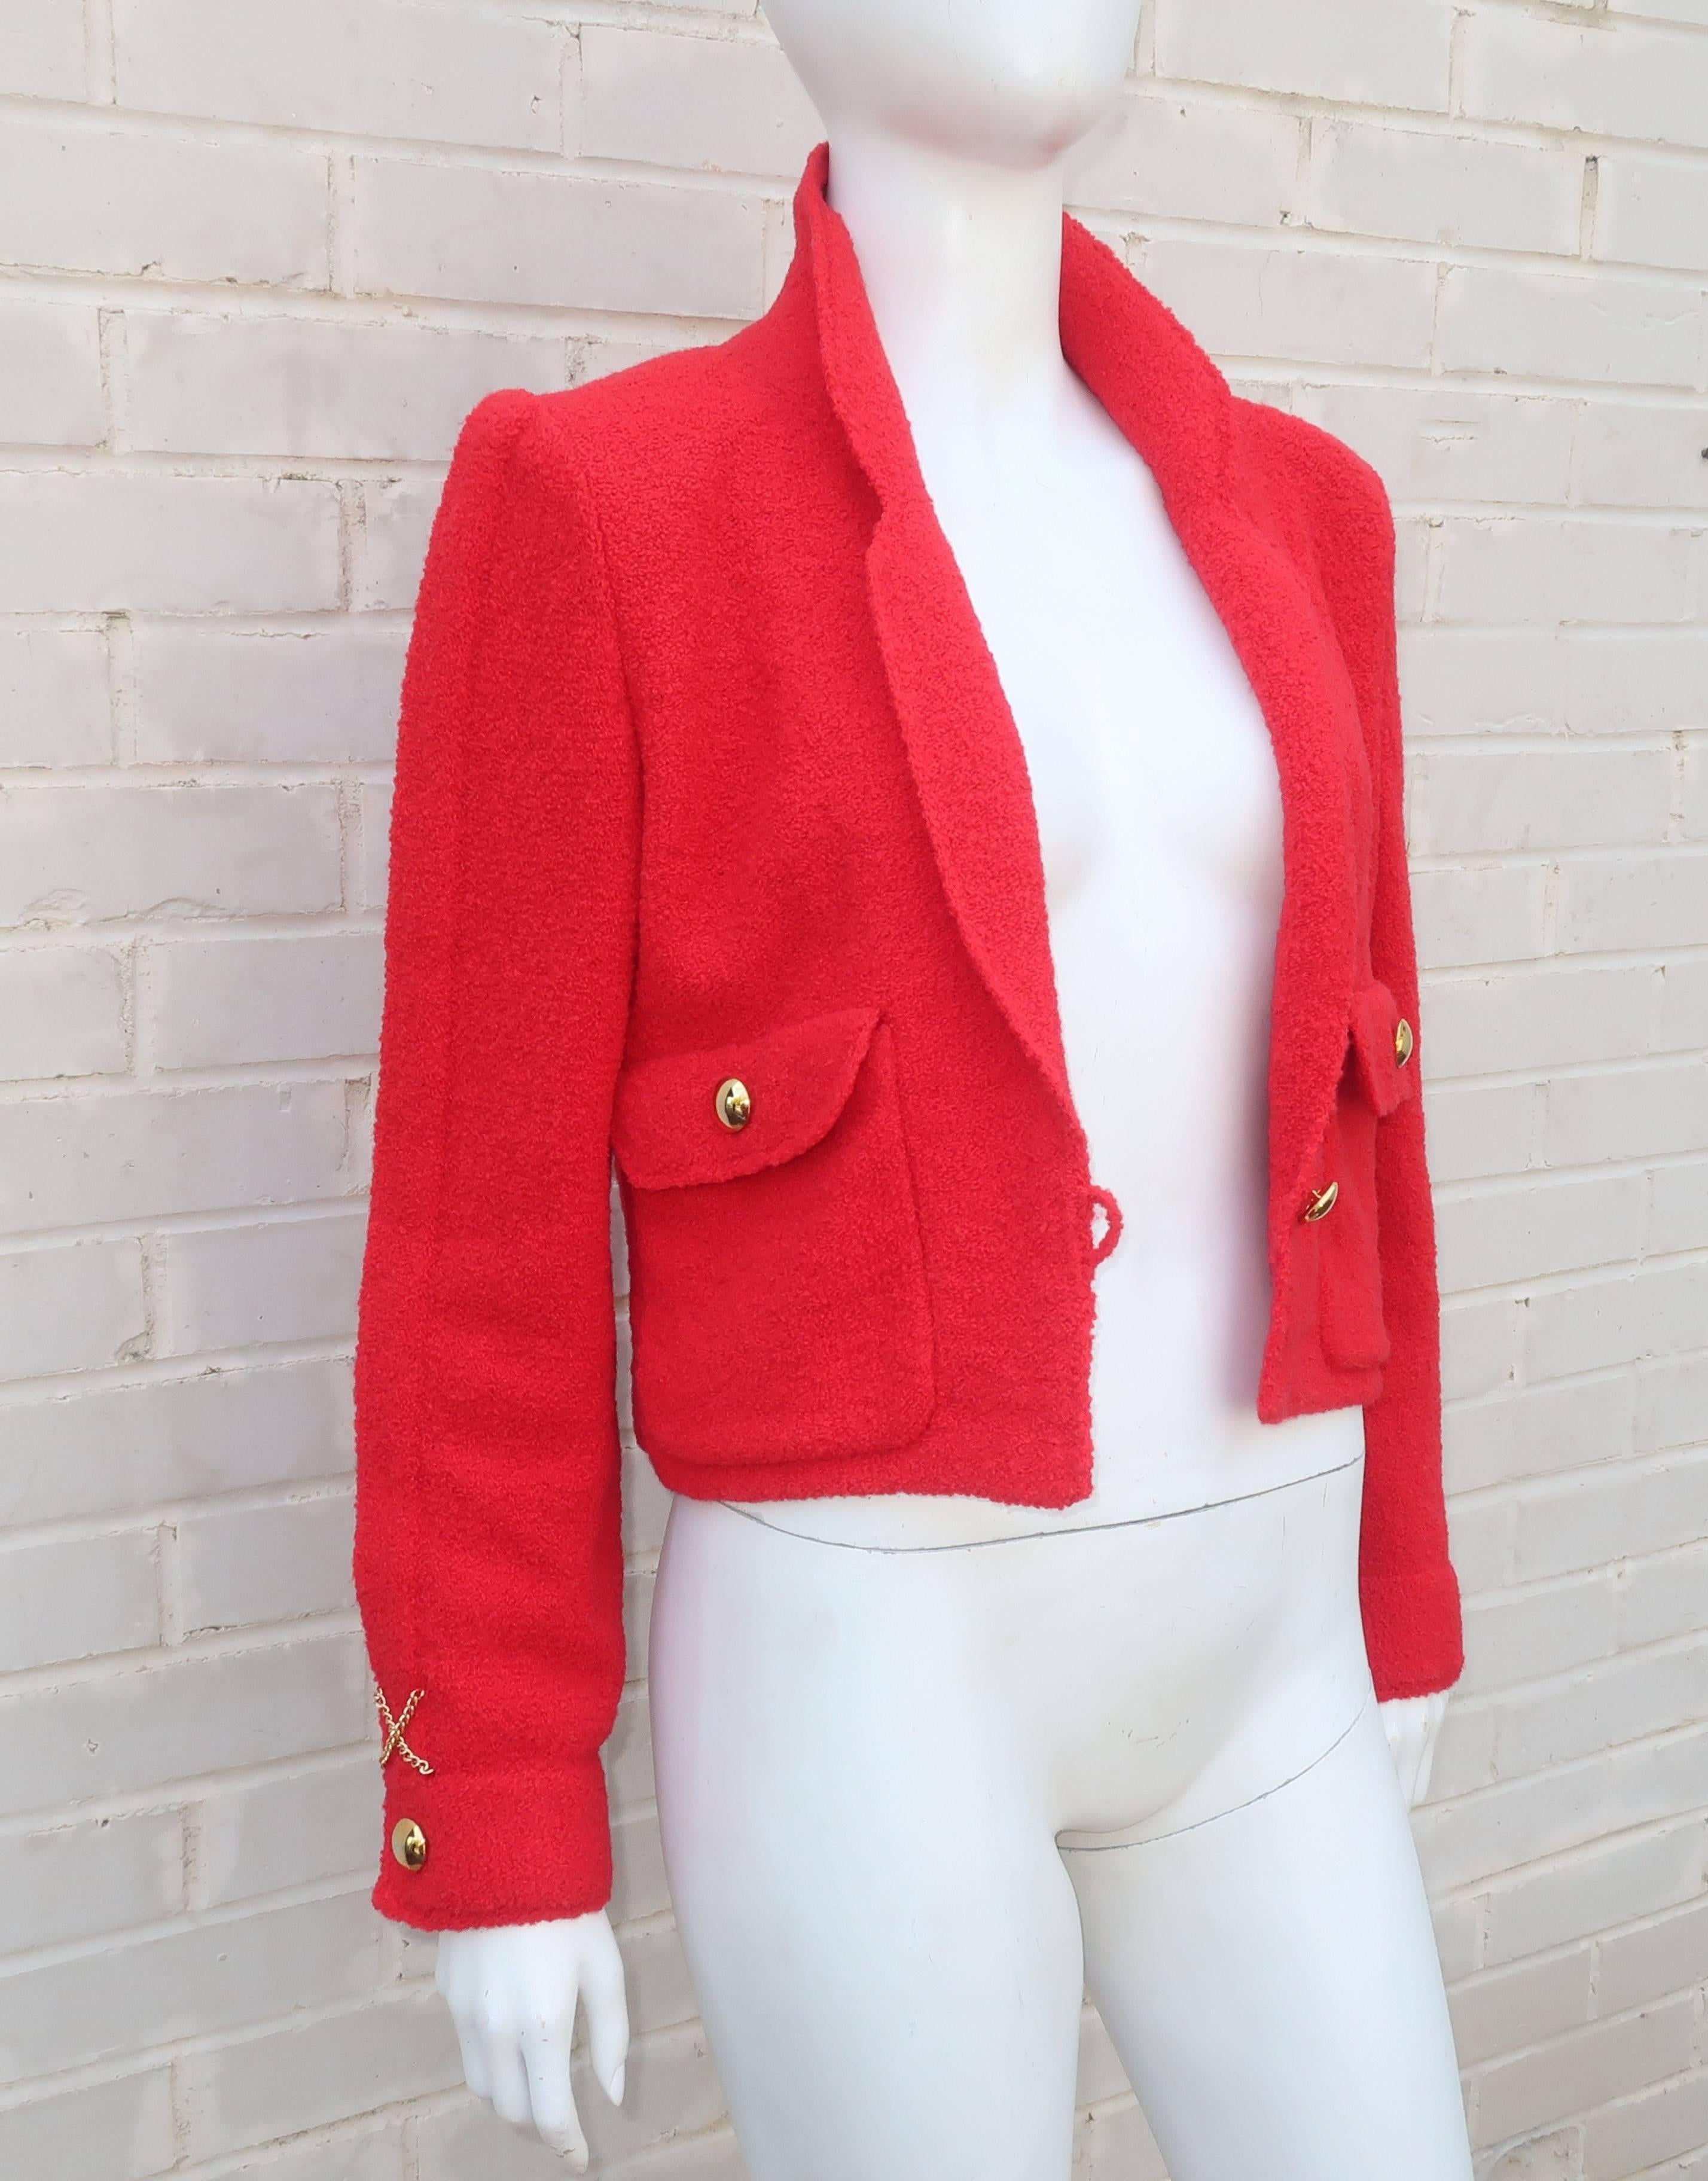 Adolfo Red Boucle Knit Skirt Suit With Chain Details, 1980s 5